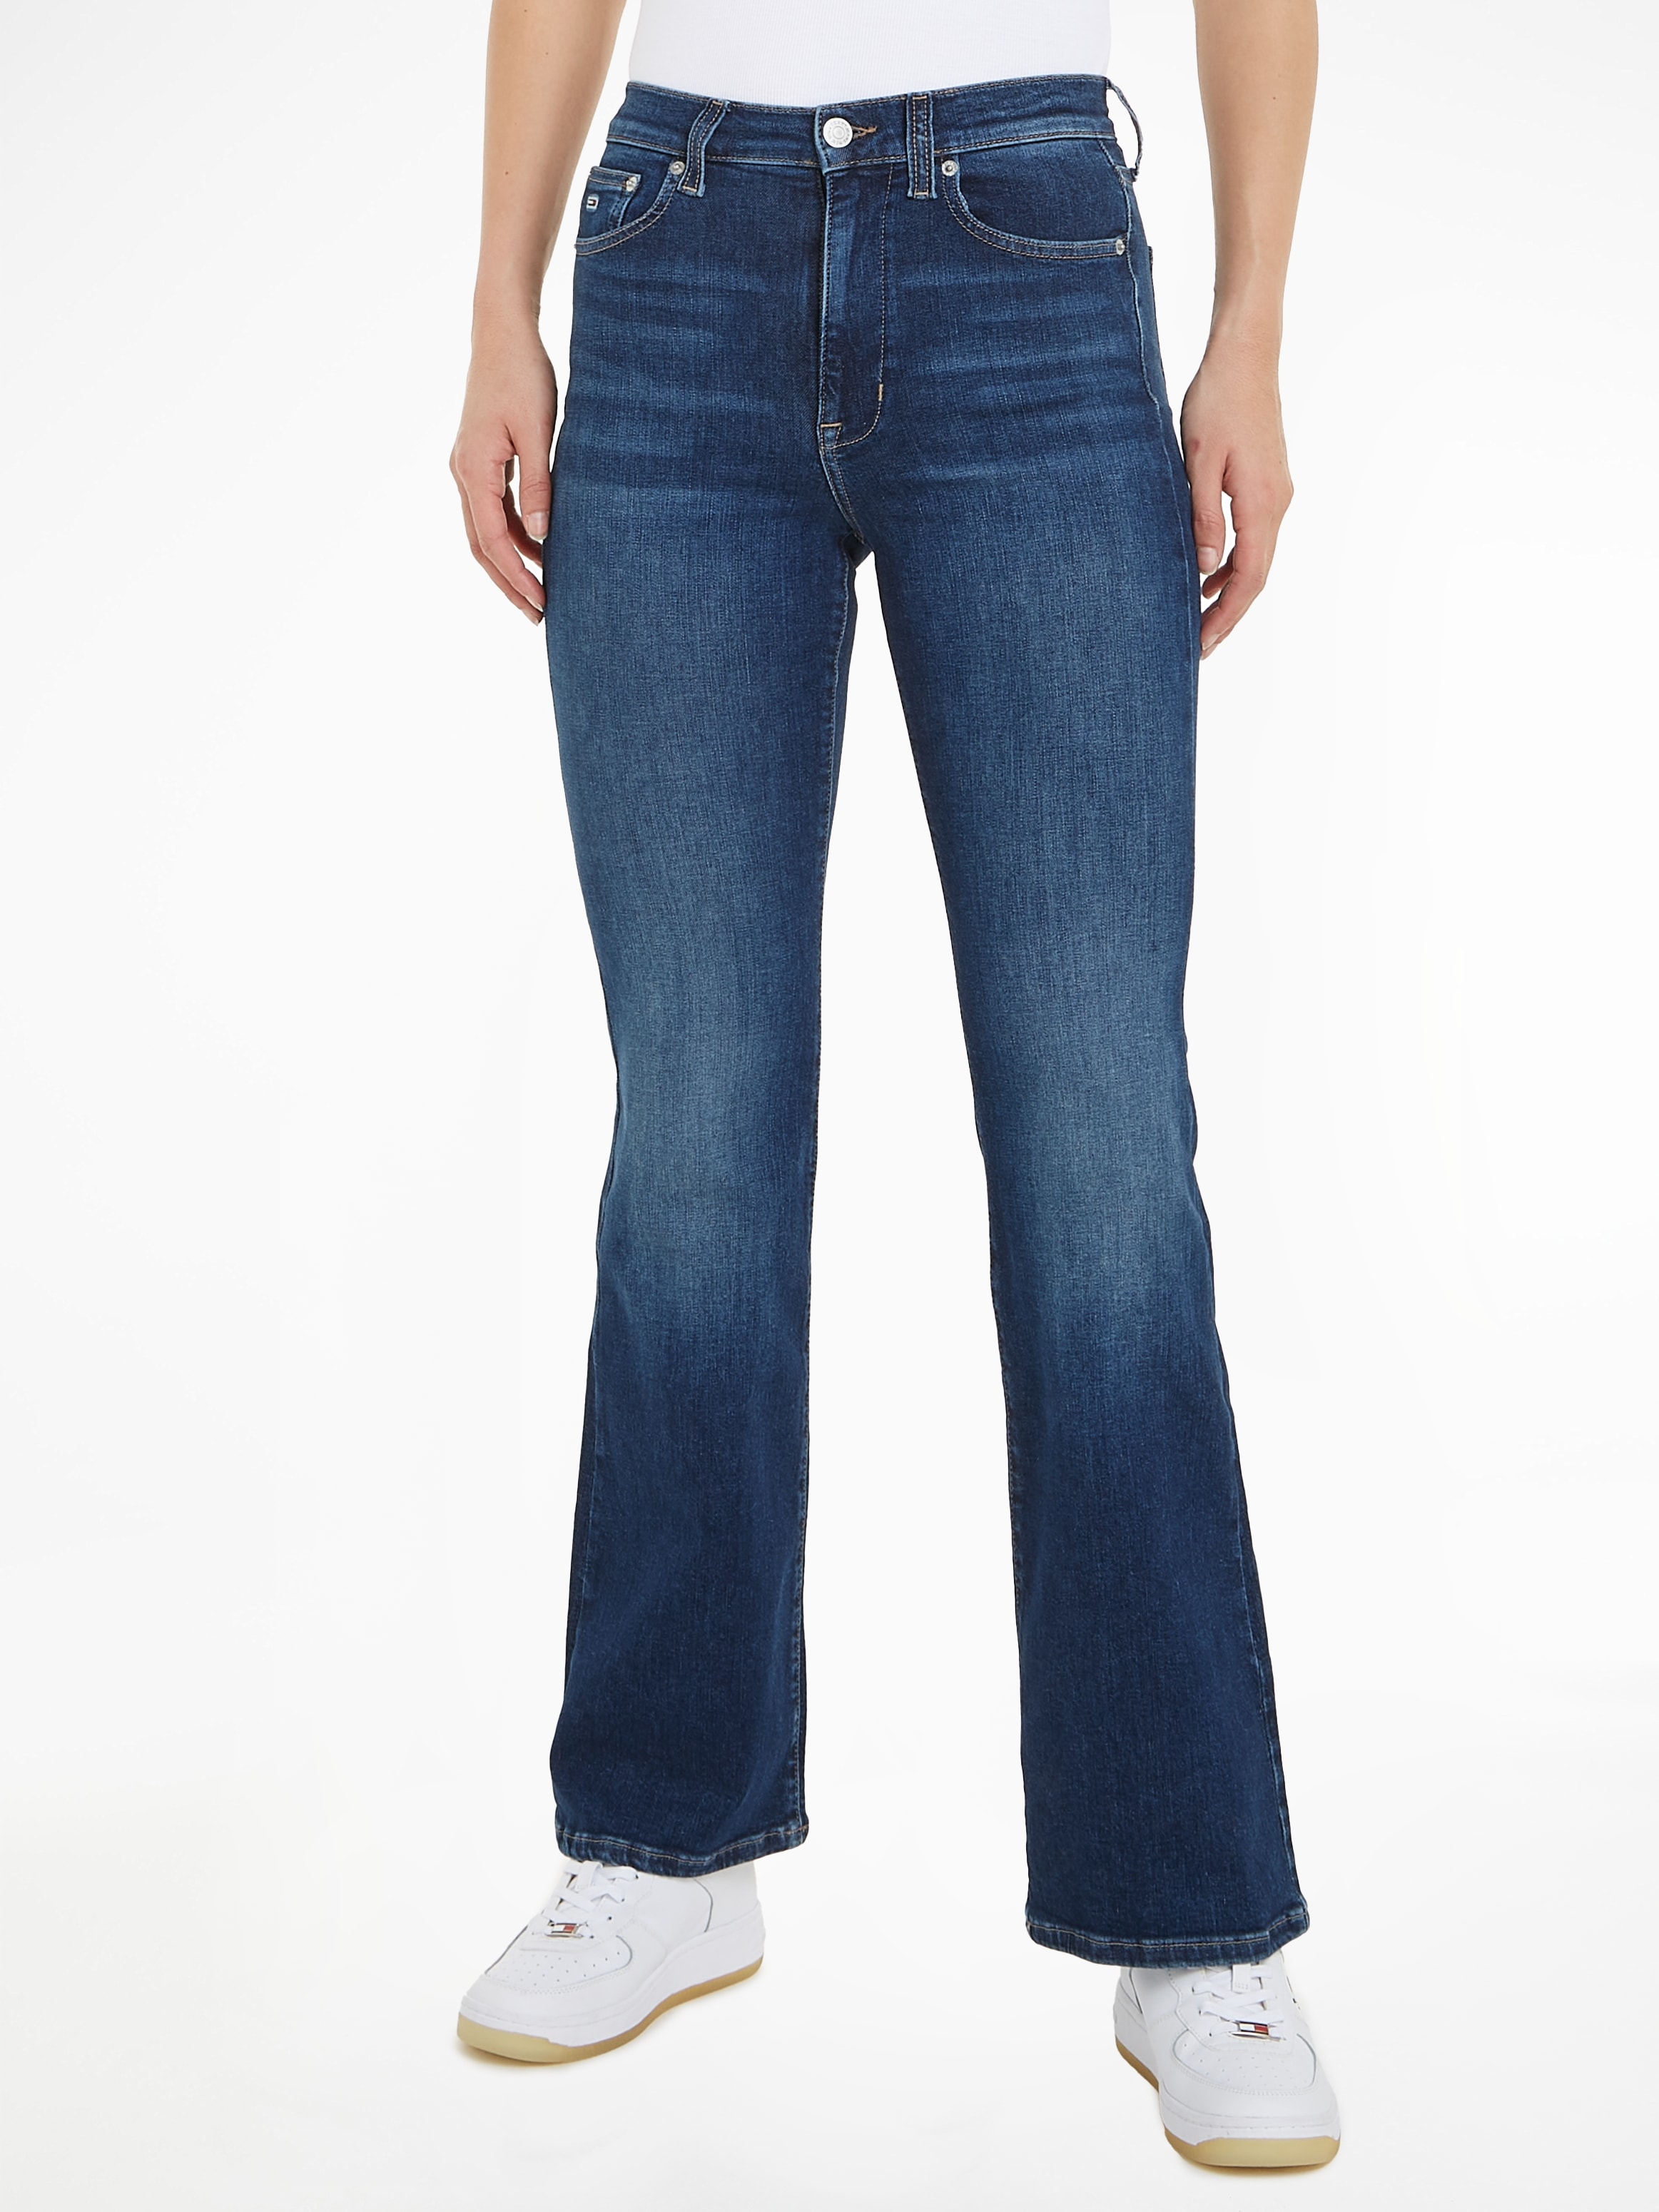 Markenlabel bei Jeans Jeans ♕ »Sylvia«, Bequeme mit Tommy